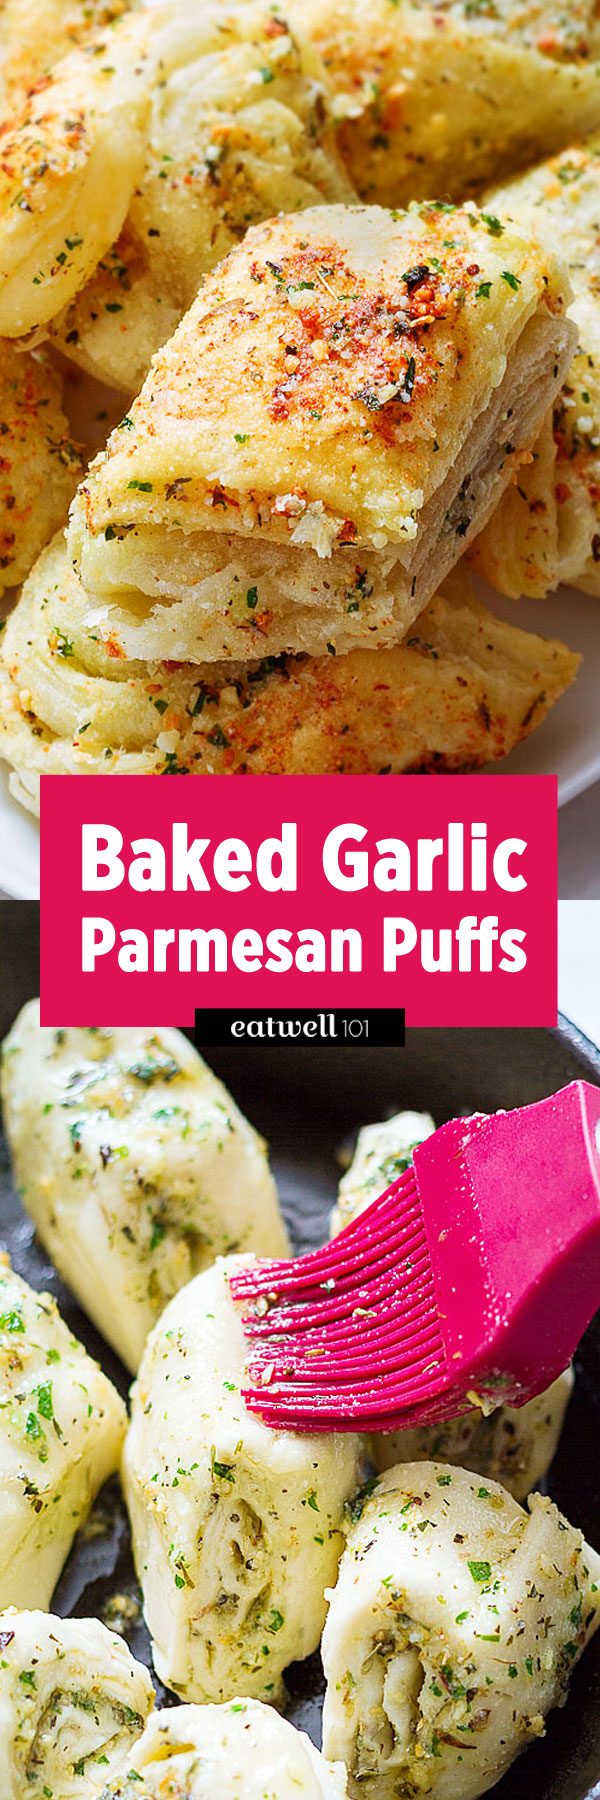 Garlic Parmesan Puffs – #eatwell101 #recipe - CRISP, CHEESY, GARLICKY appetizers that come together in less than 20 min – SO delicious!